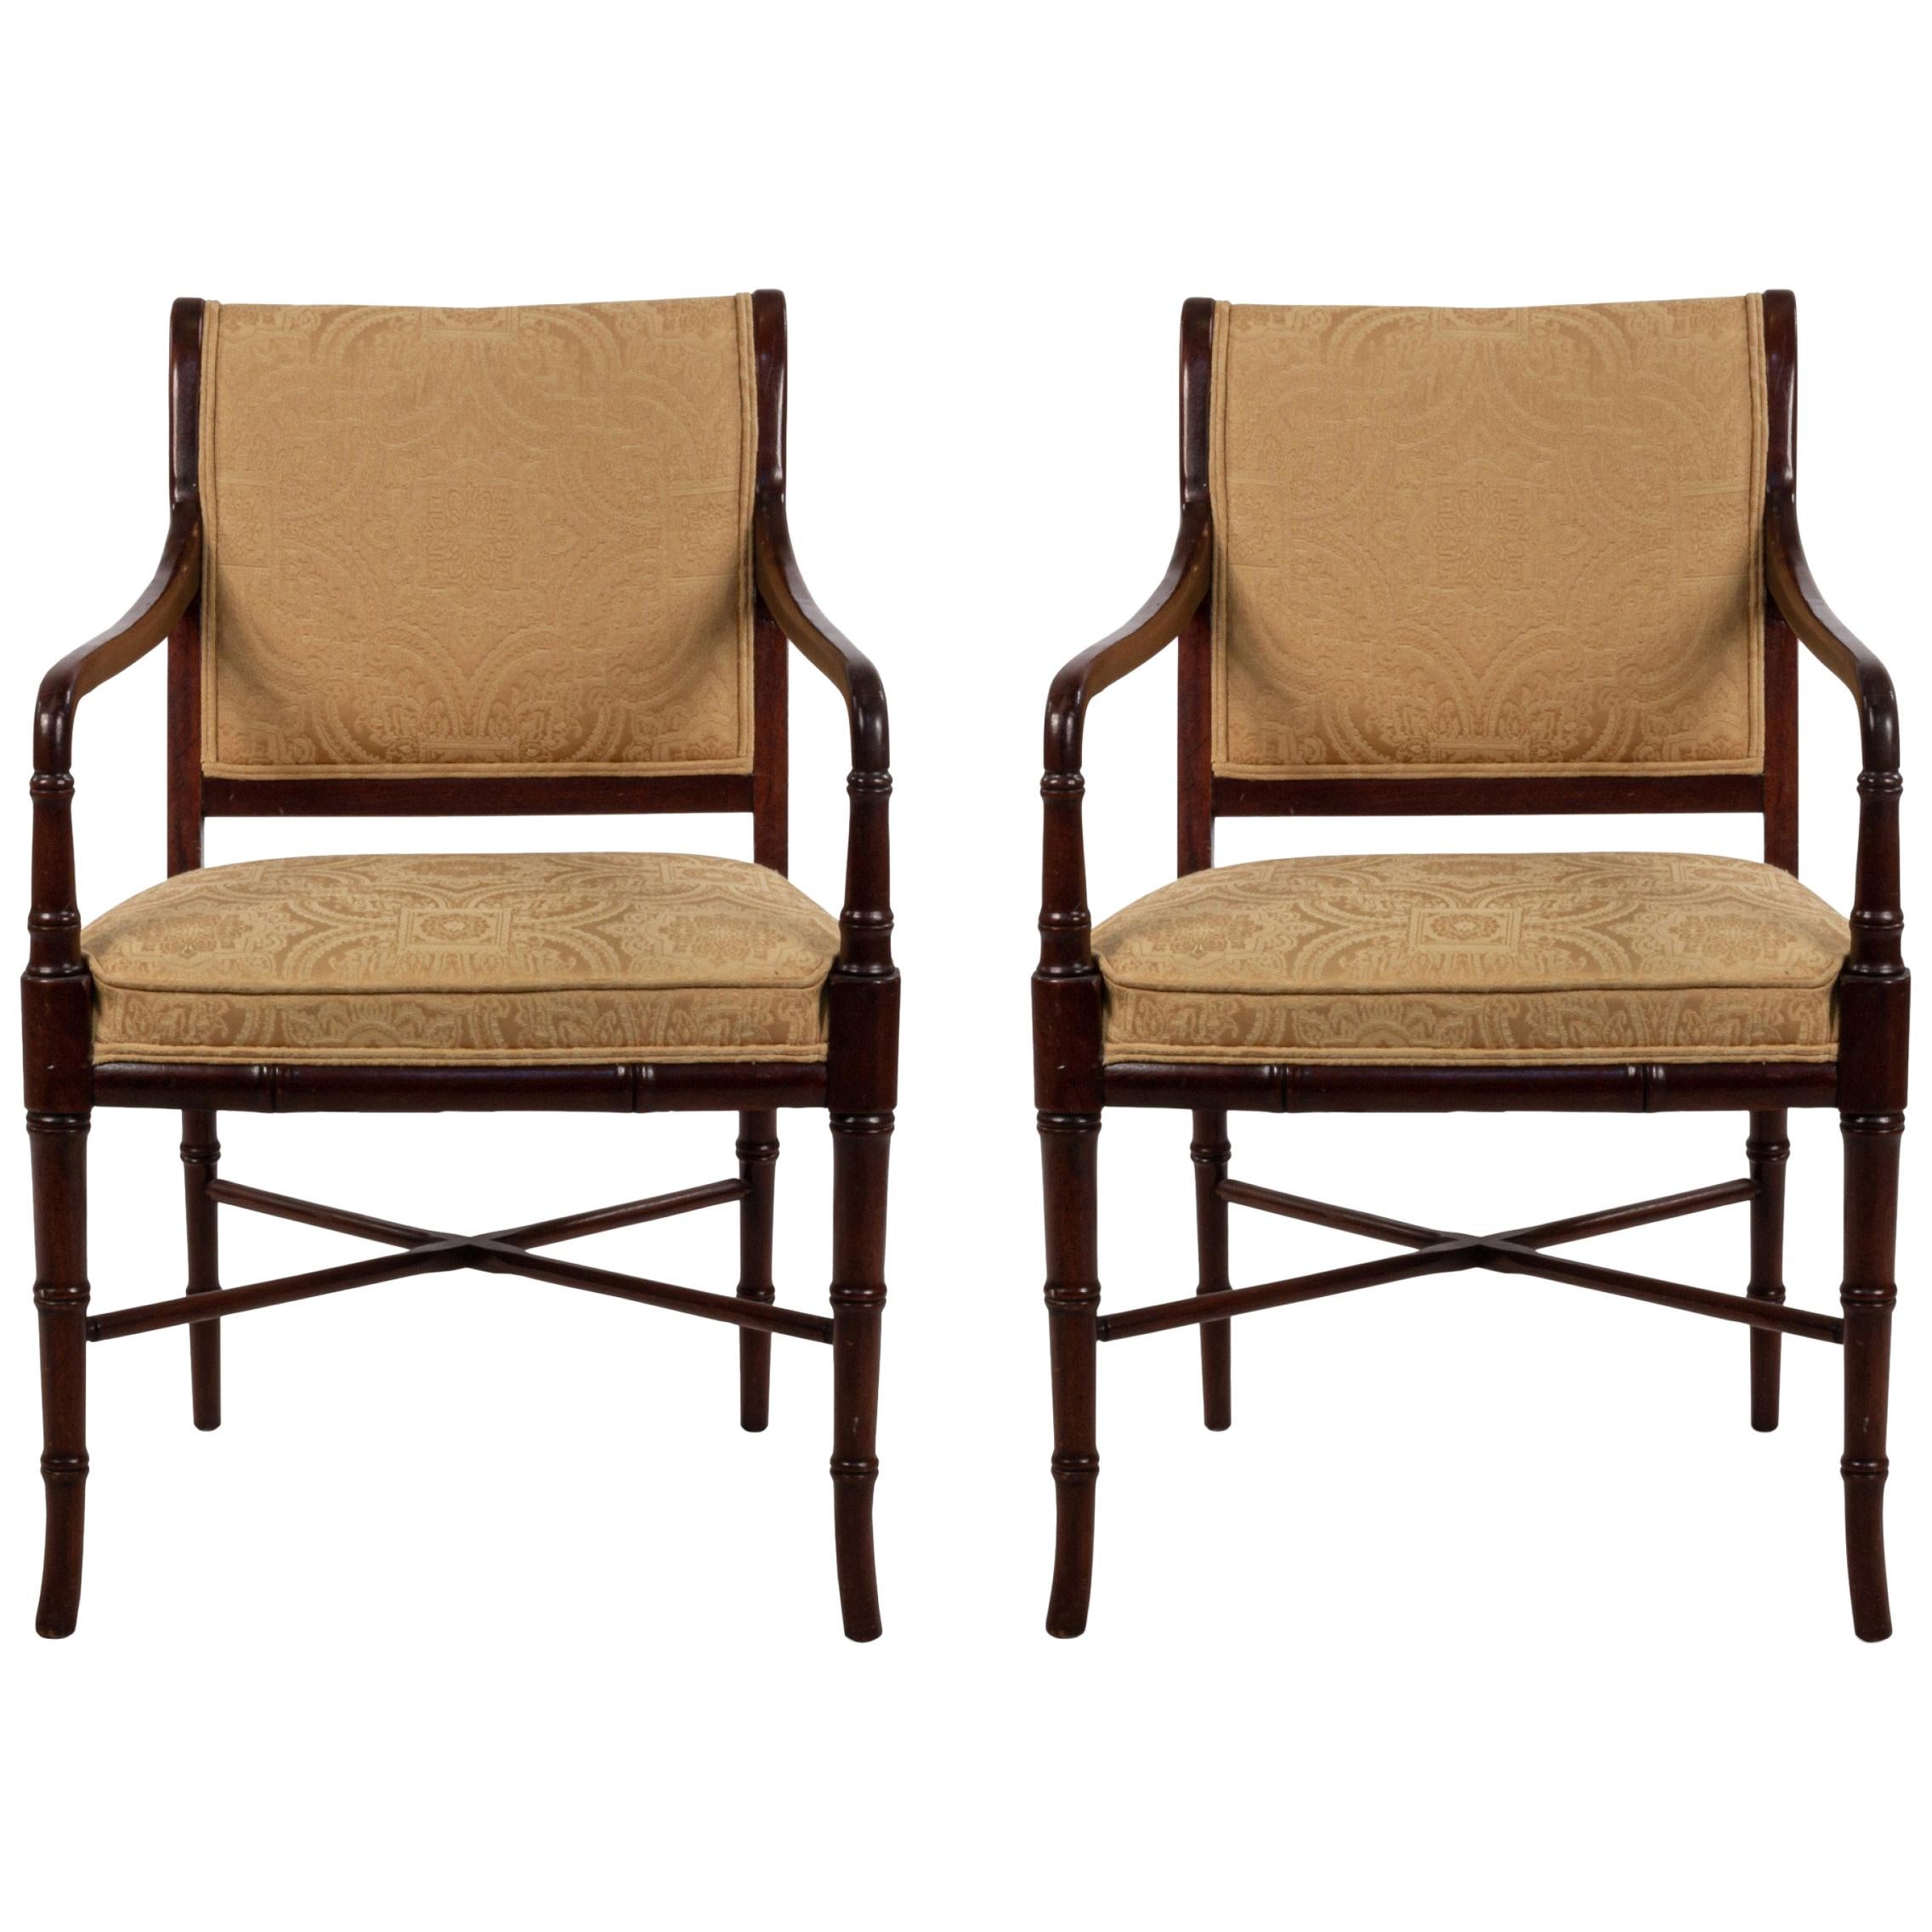 6 Regency Style Mahogany Armchairs with Yellow Damask Upholstery